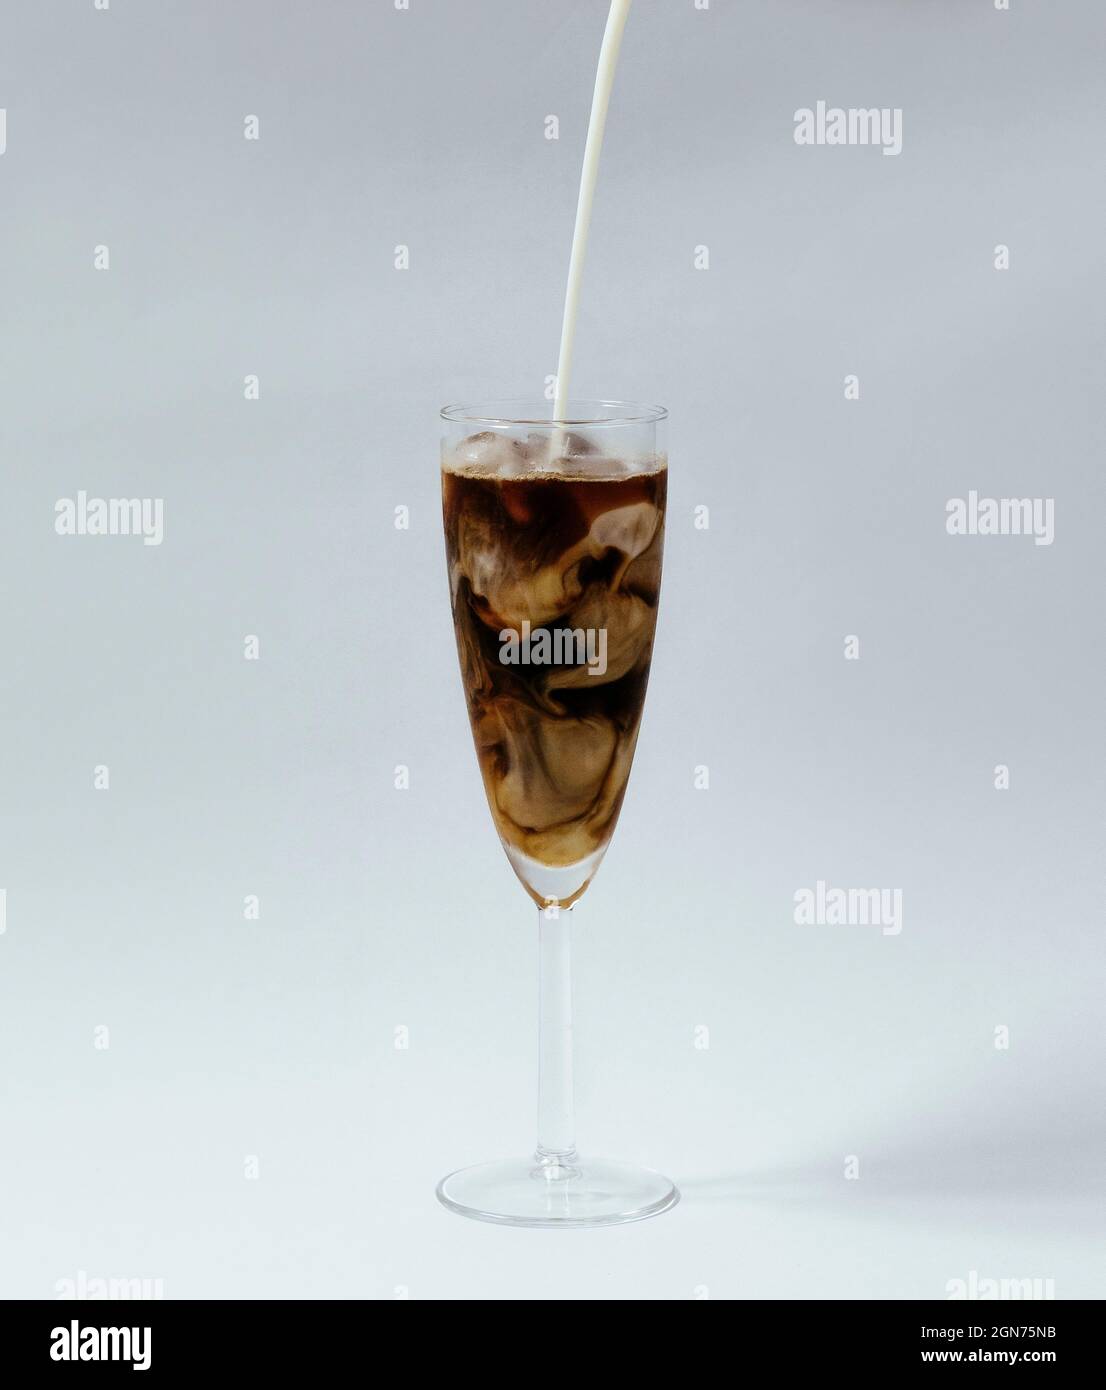 https://c8.alamy.com/comp/2GN75NB/milk-pouring-into-iced-coffee-swirling-on-white-background-2GN75NB.jpg